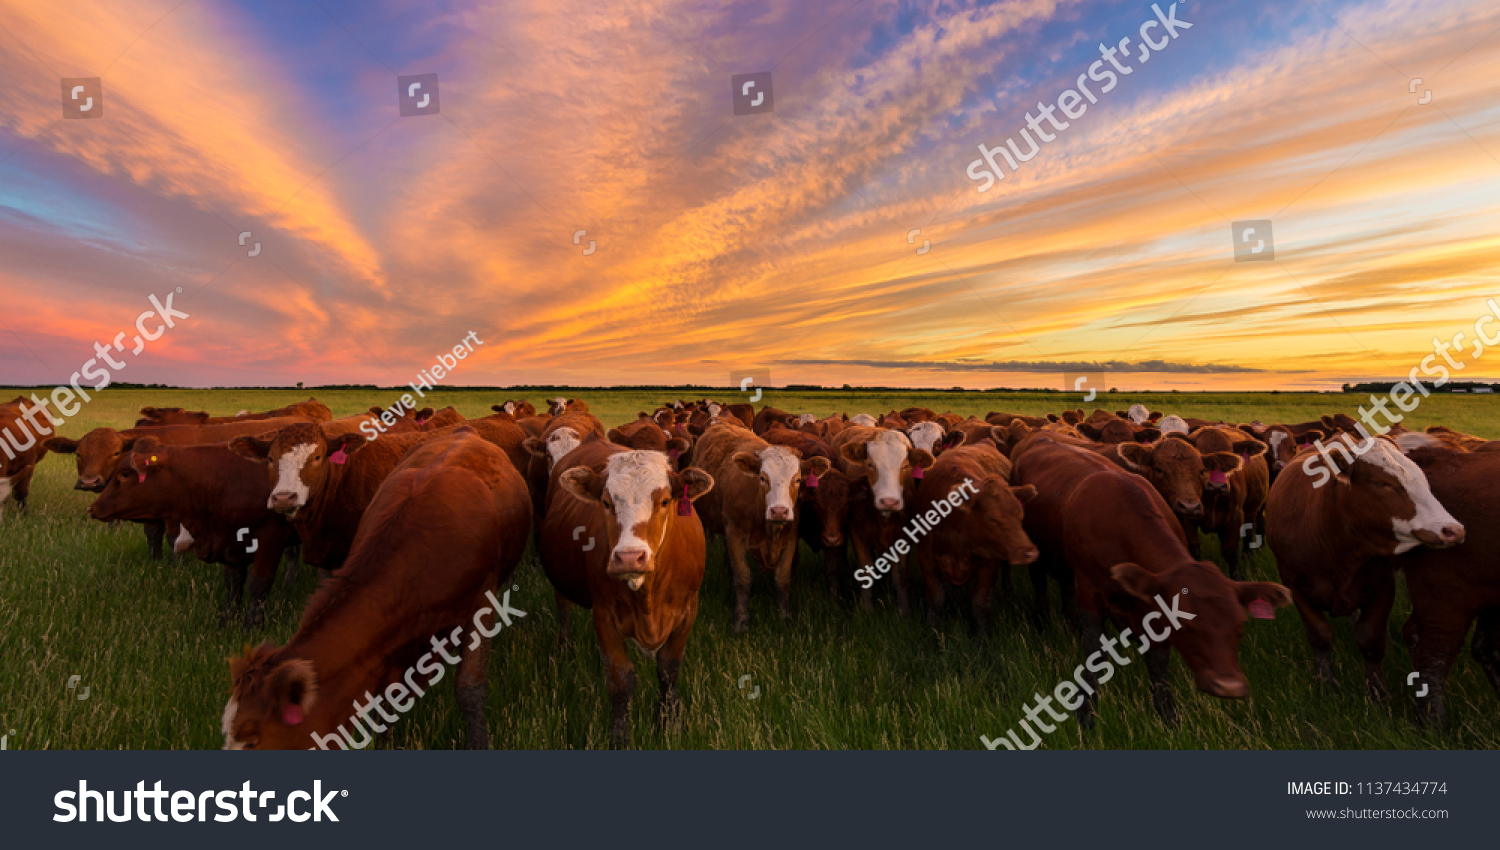 Cattle grazing in the pasture at sunset in the country. #1137434774